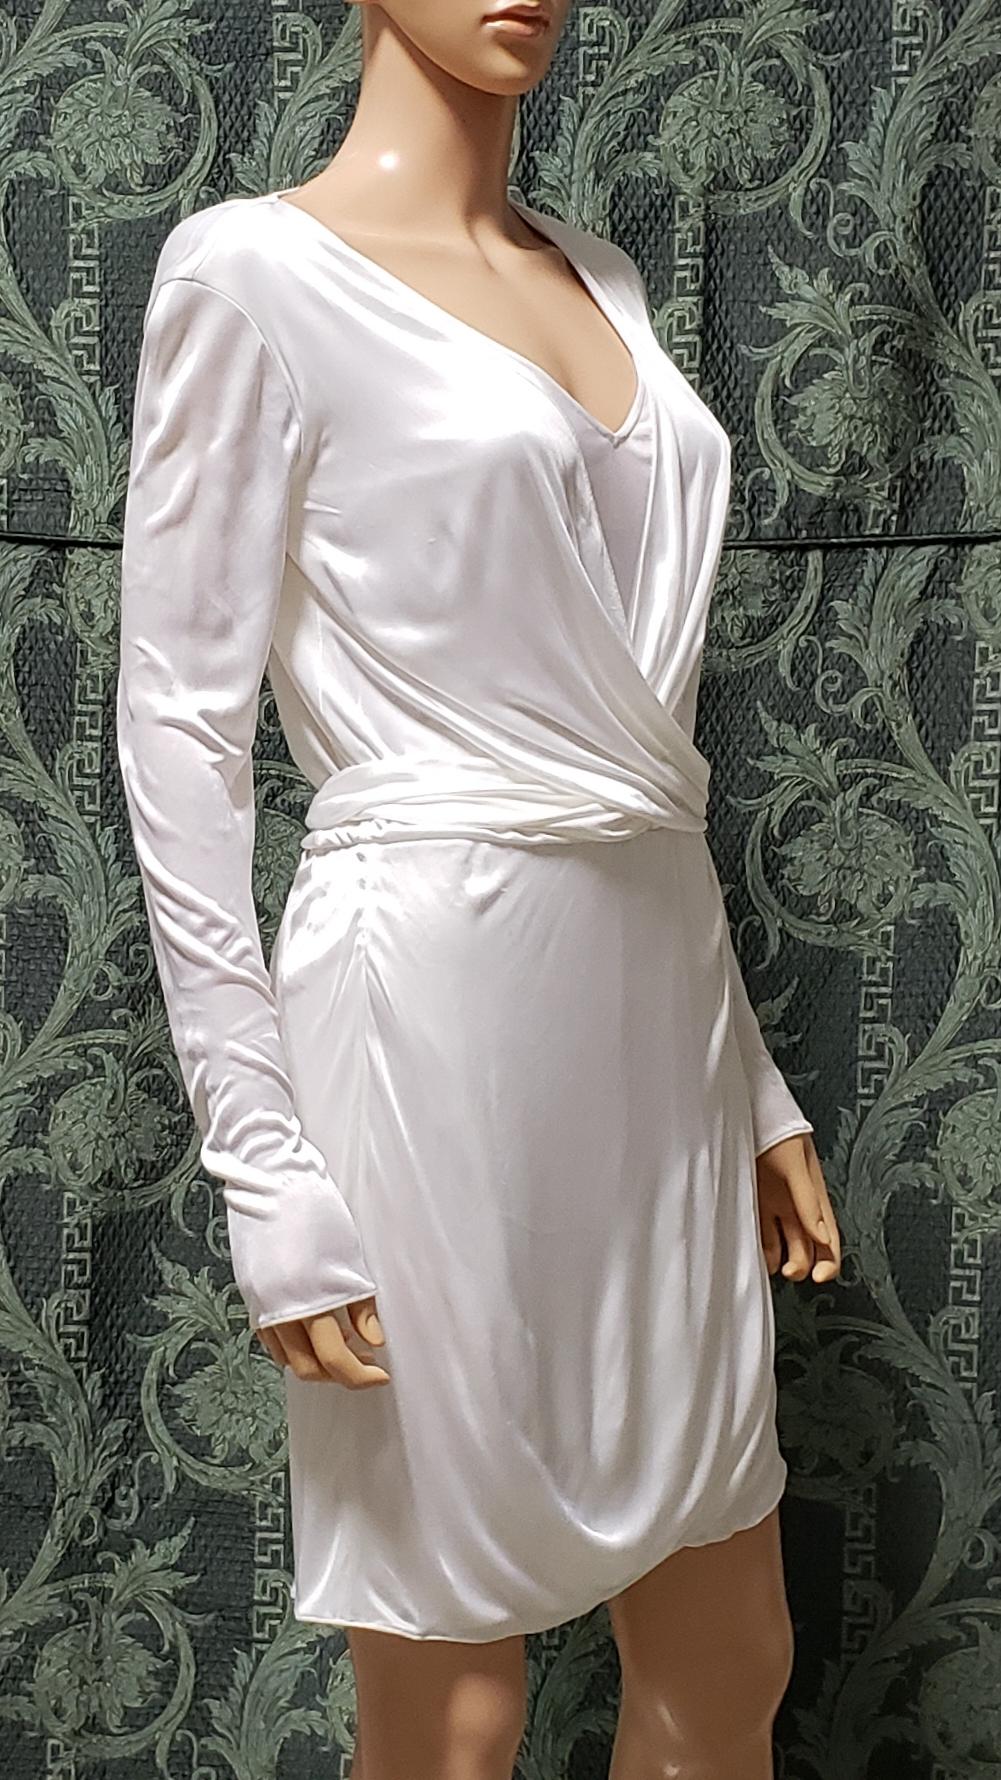 New VERSACE DELICATE PEARL WHITE MINI DRESS 42 - 6 In New Condition For Sale In Montgomery, TX